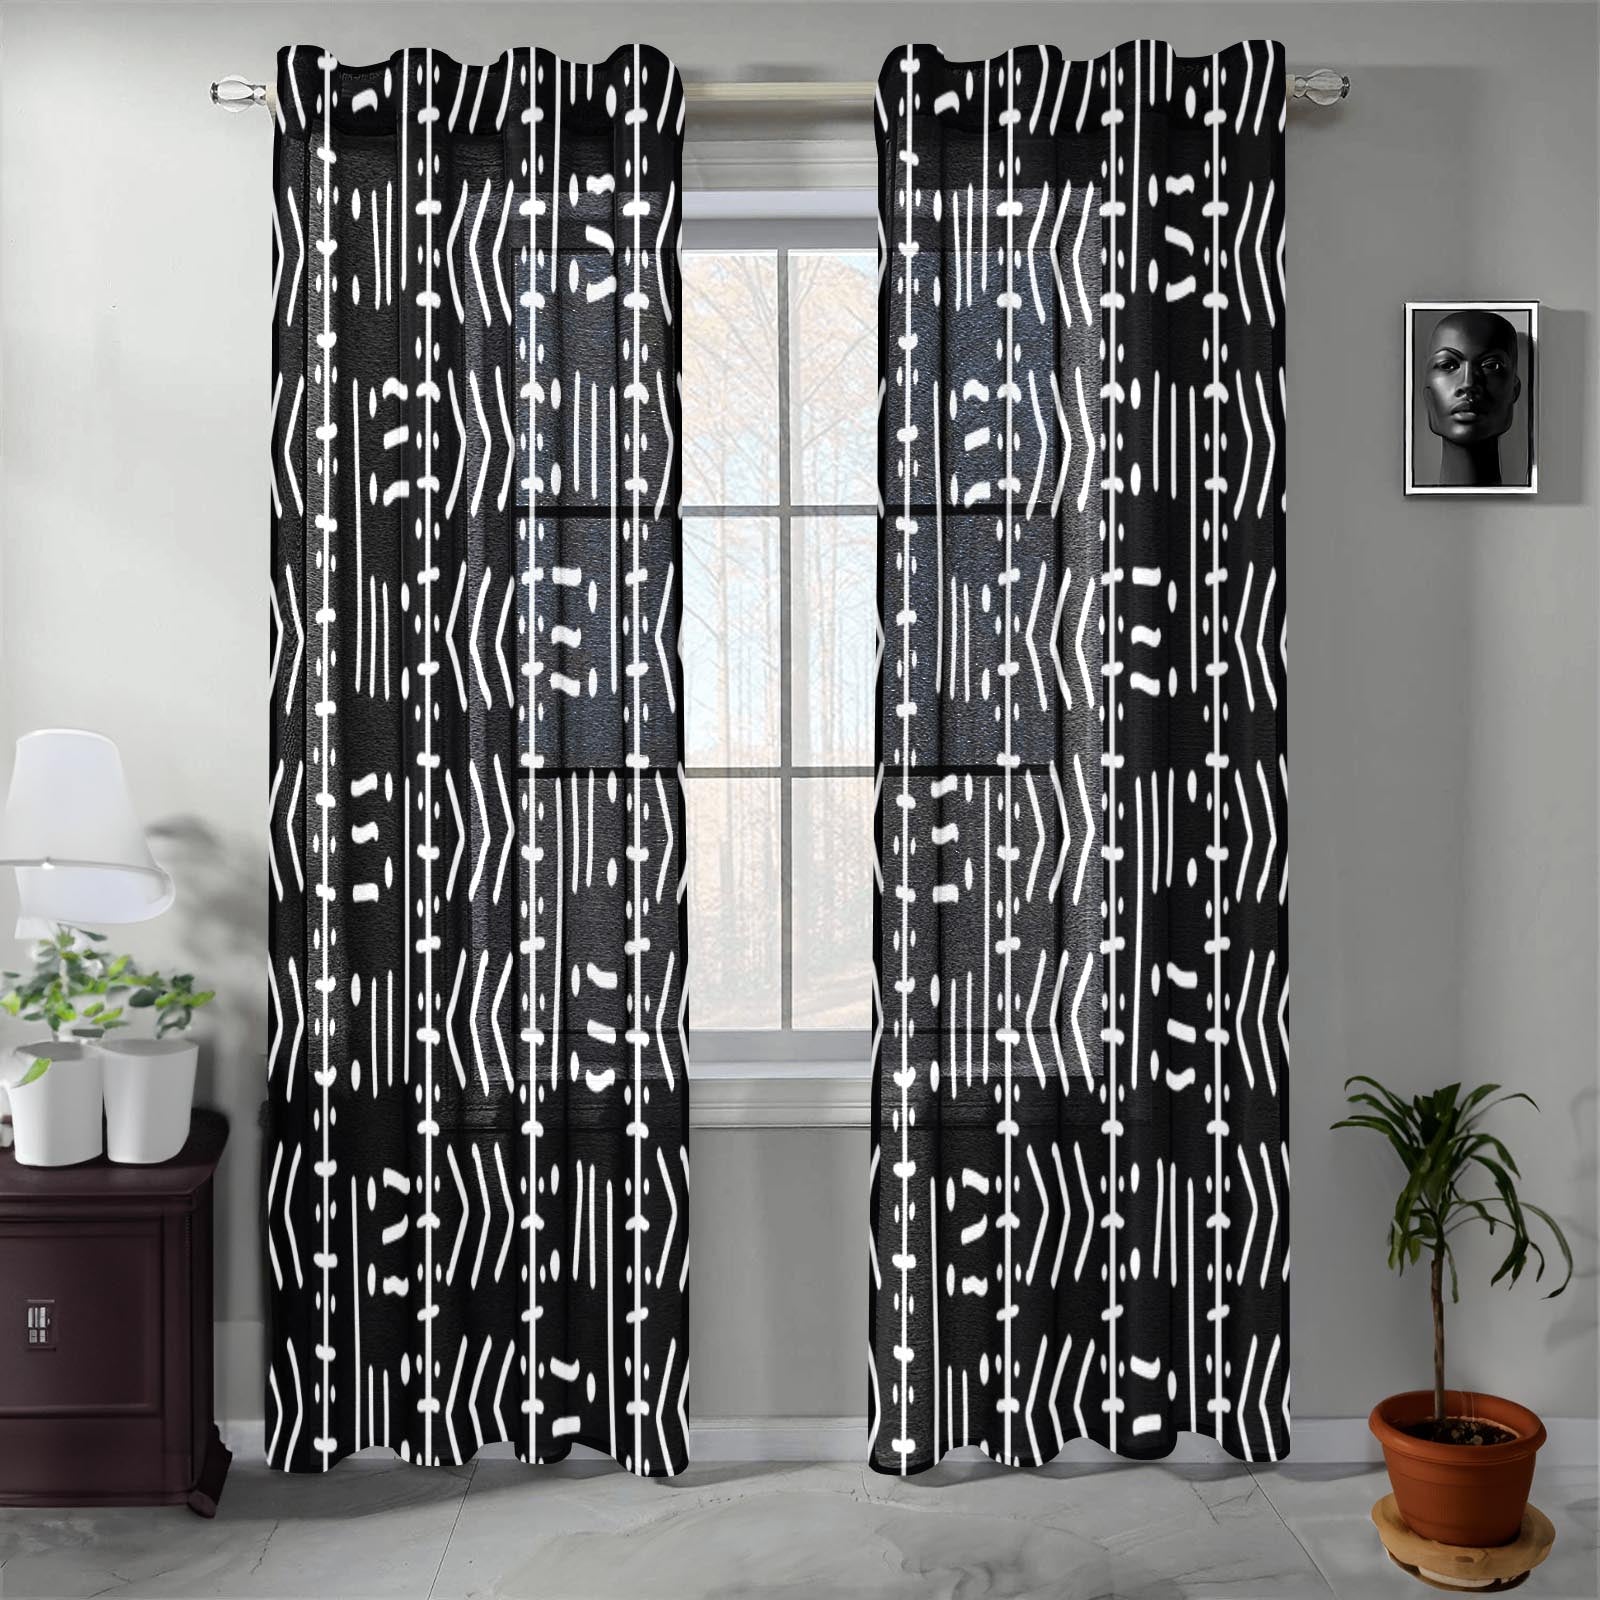 Black and White African Curtain Tribal Print (Two Piece)- Bynelo